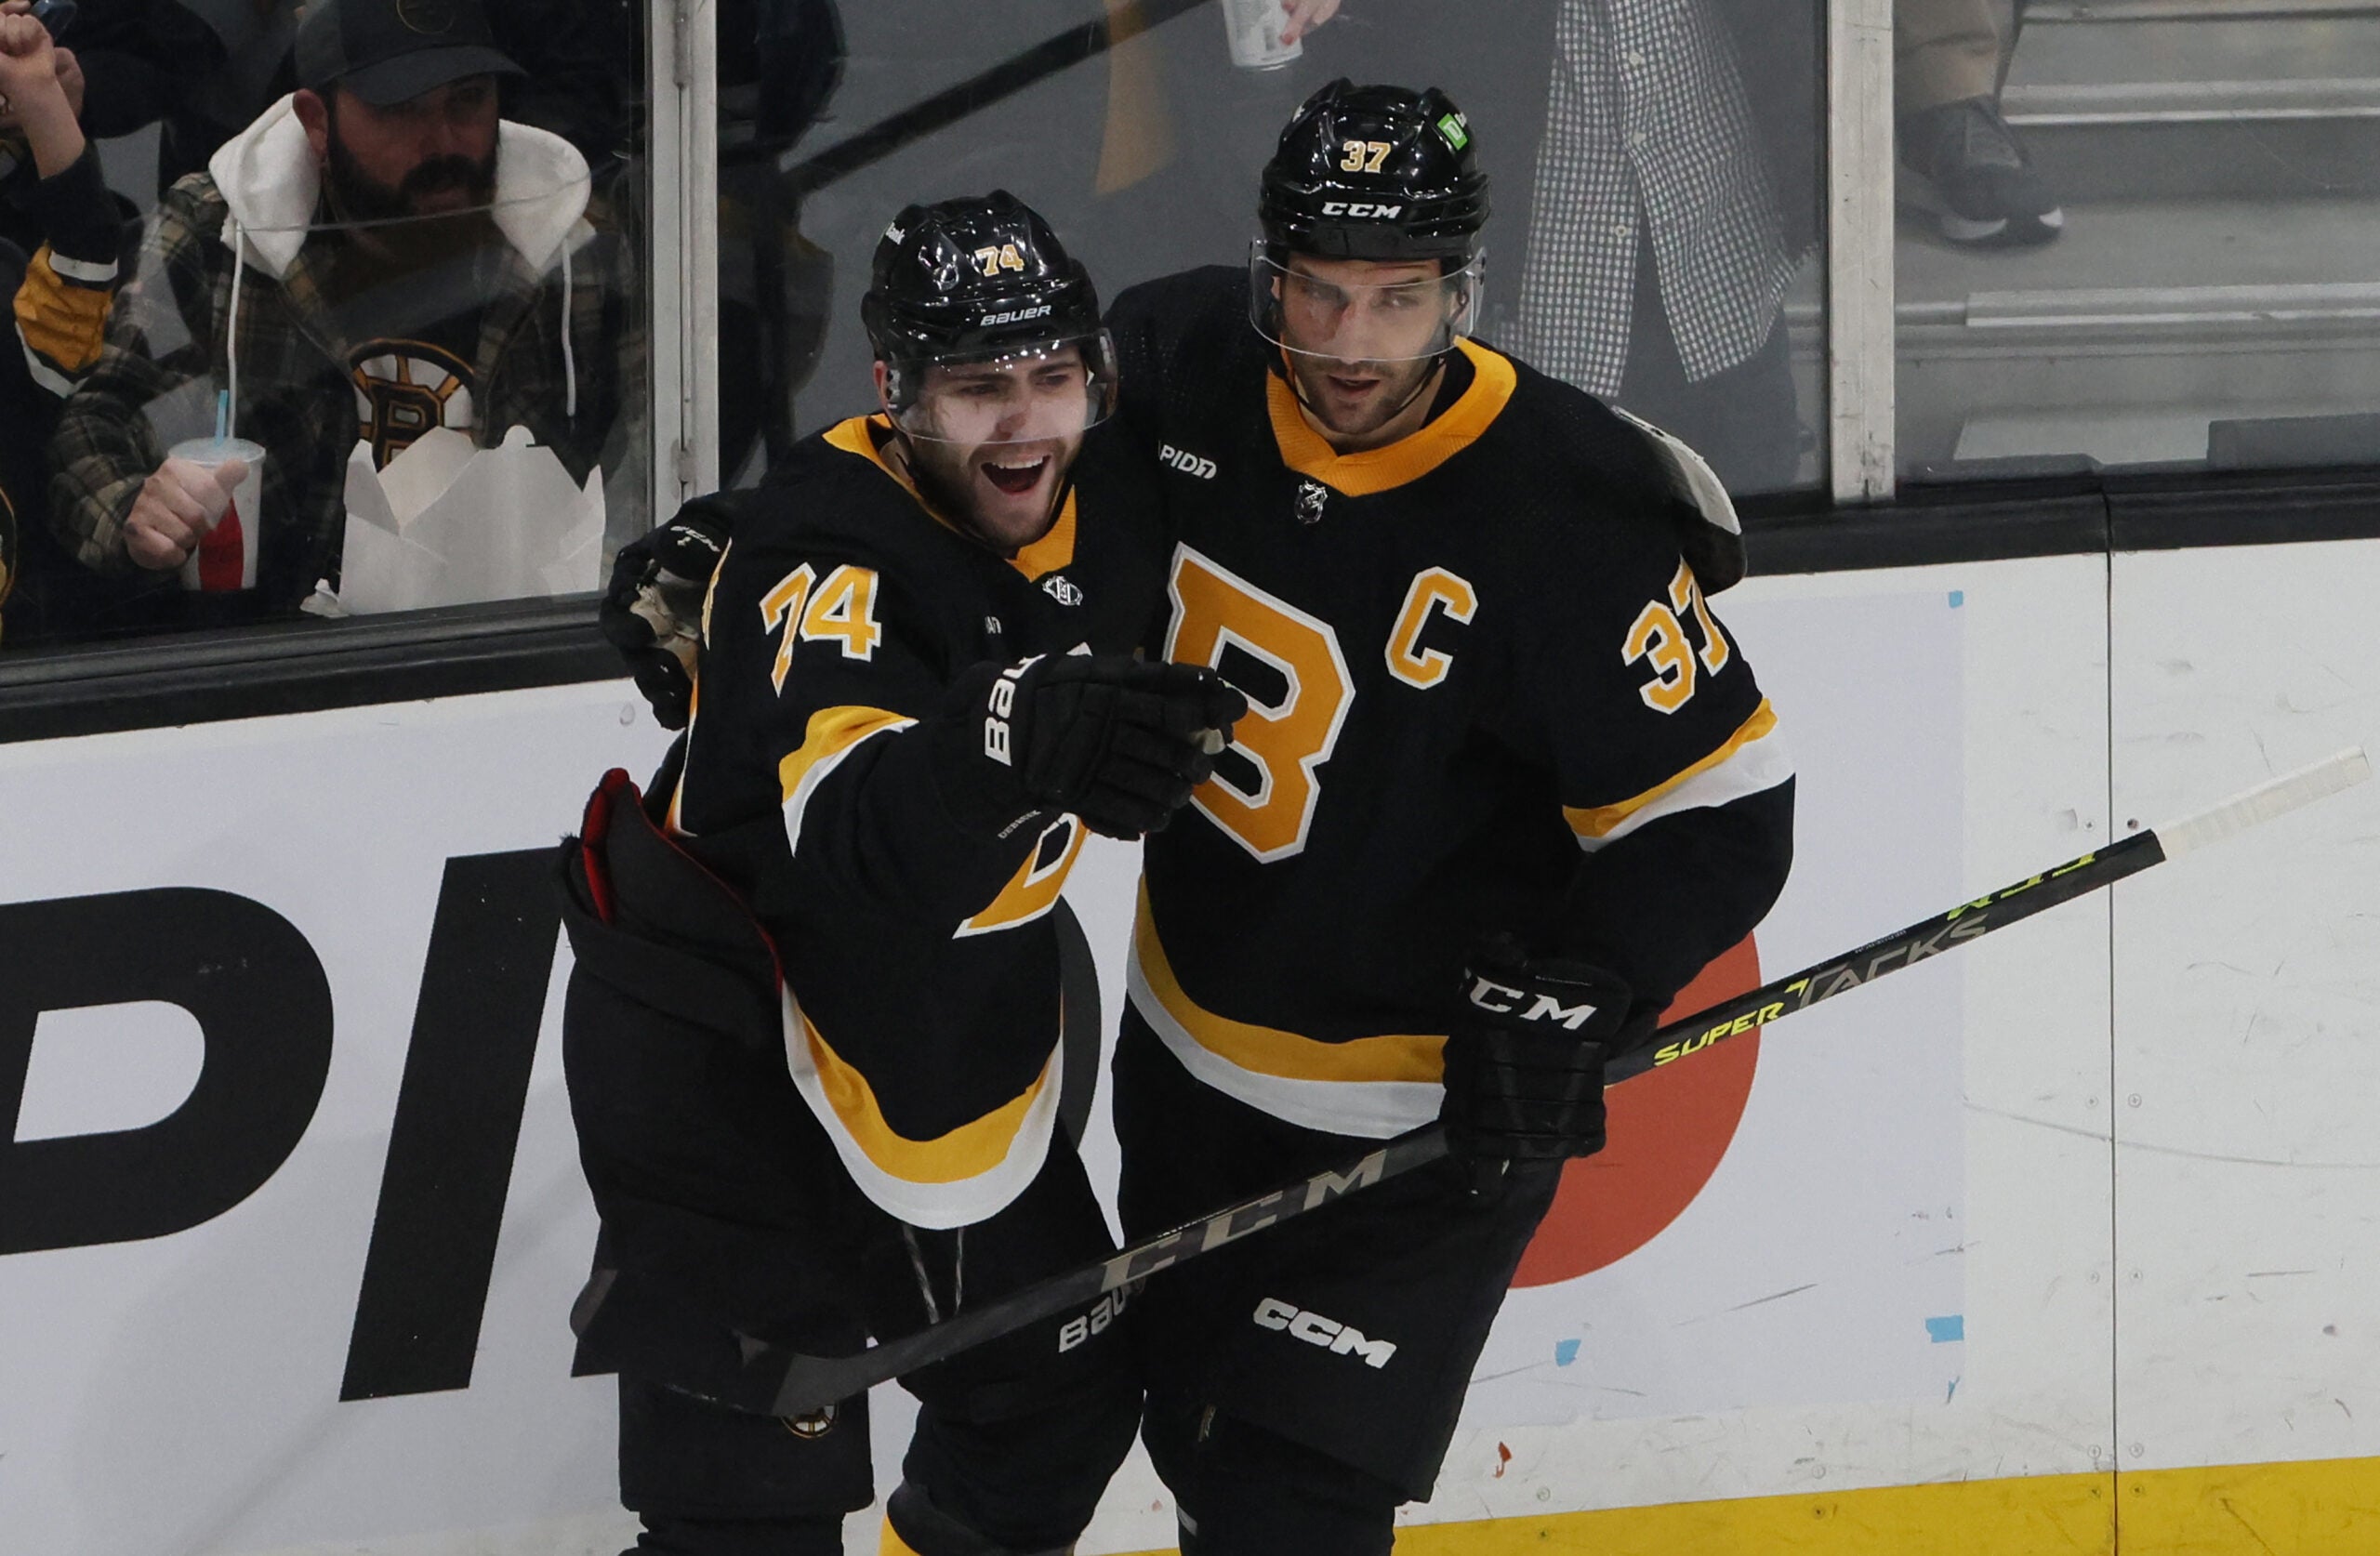 Boston Bruins Jake DeBrusk (L) celebrates his goal against the Ottawa Senators Goalie with teammate Patrice Bergeron during the first period of play at TD Garden.